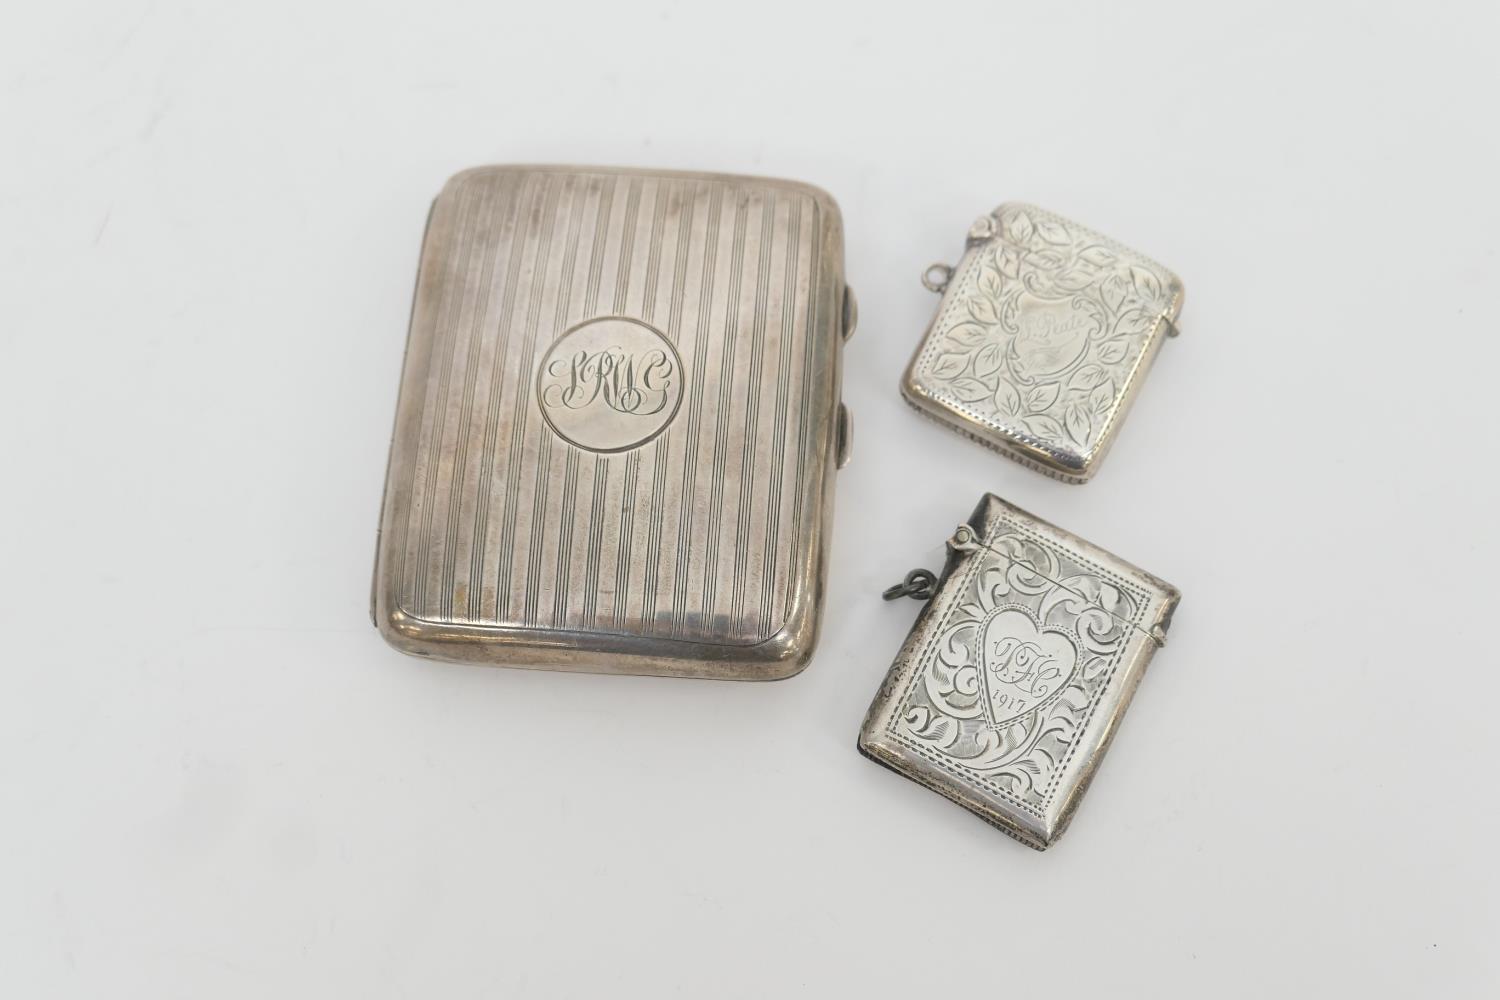 Silver cigarette case, Birmingham 1911, curved form with linear decoration, 8.5cm; also two silver